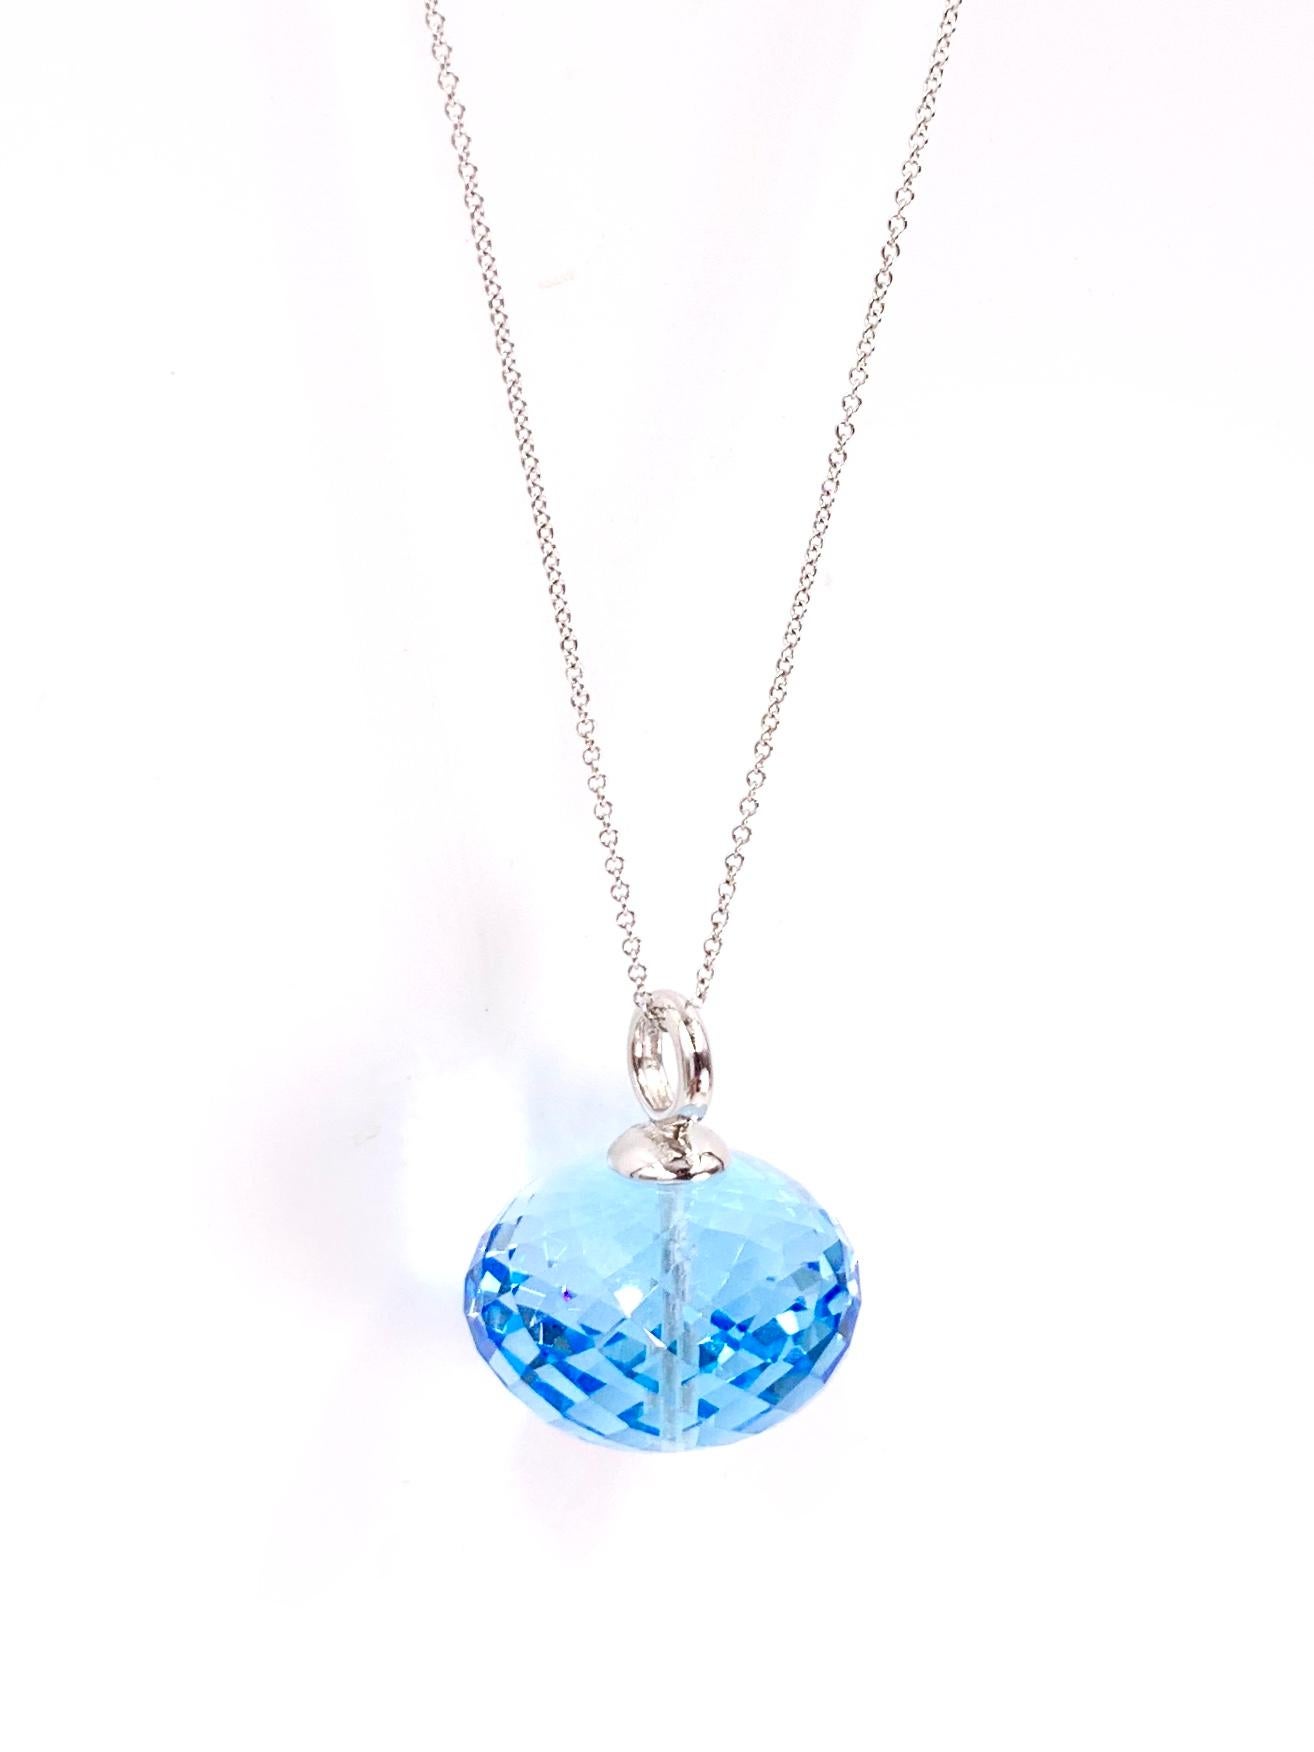 Exclusively by fine fashion jewelry designer, Goshwara. From the uniquely beautiful 'Beyond' collection is a stunning 18mm x 12mm faceted blue topaz pendant on a delicate 18 karat white gold 16